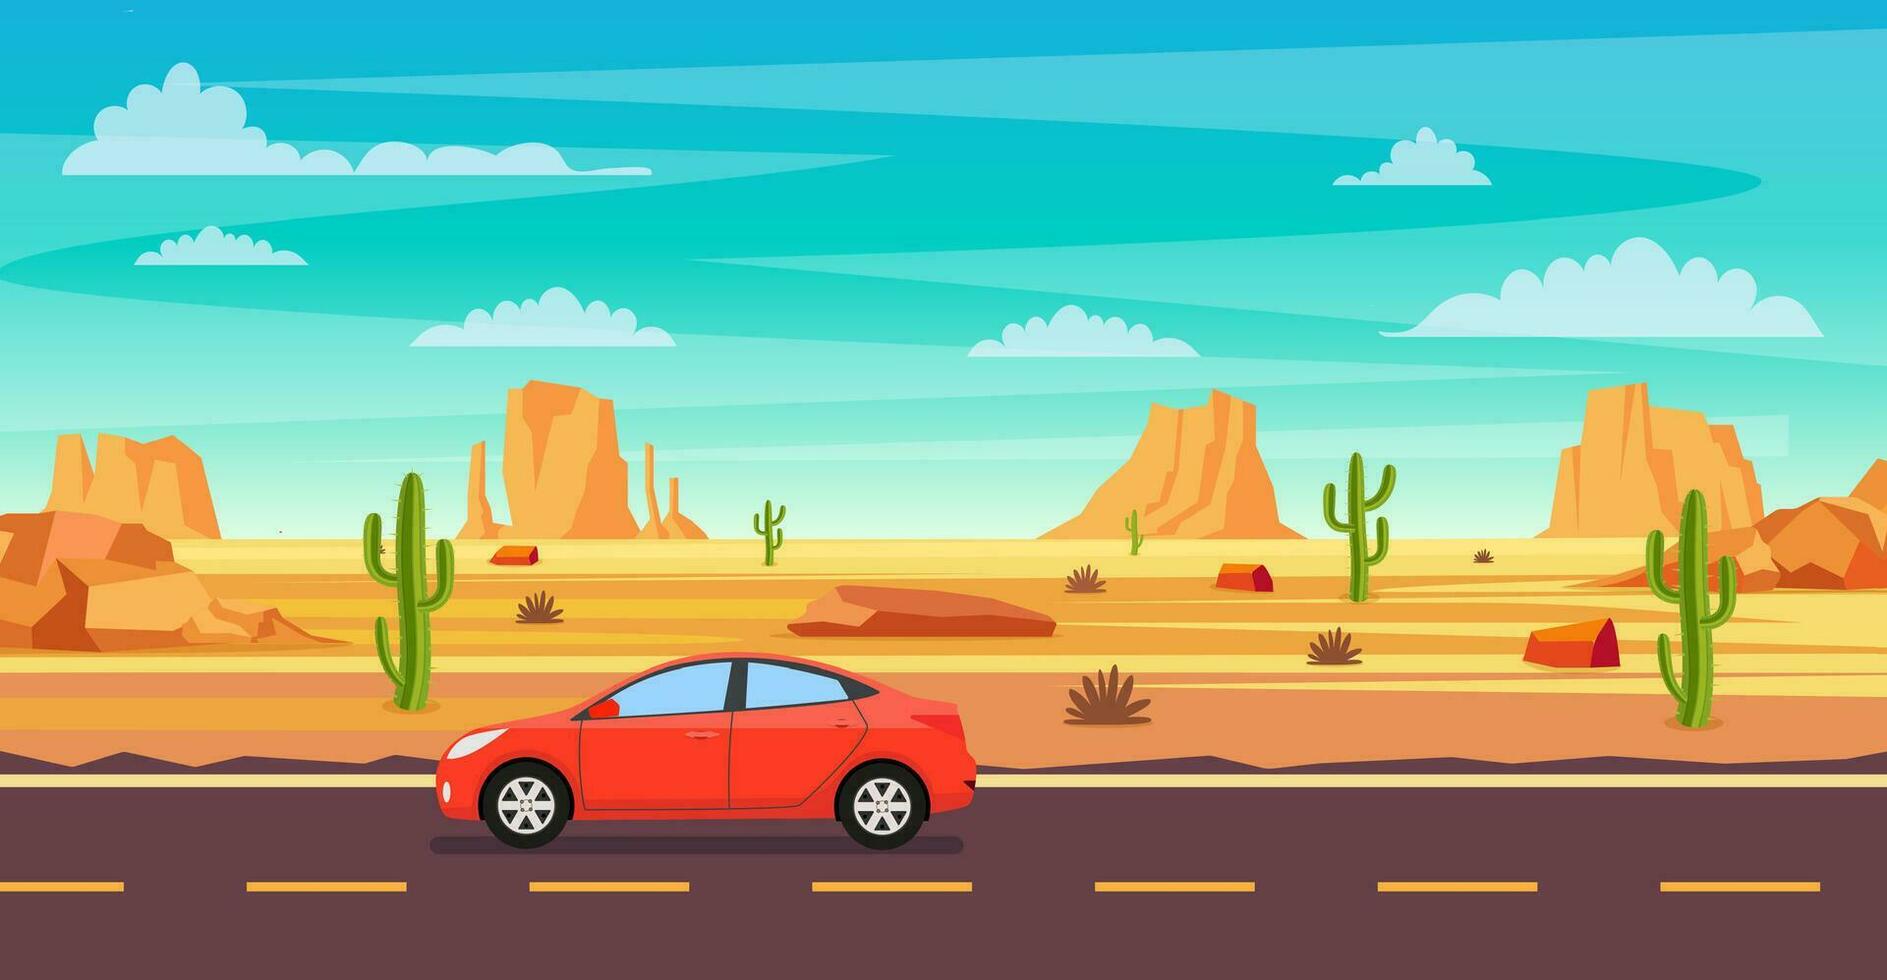 desert landscape. Cactus plants,road and rocks on the sands. natural background. Red Car Driving on a Road in the desert Cartoon Wild West Texas. Vector illustration in flat style